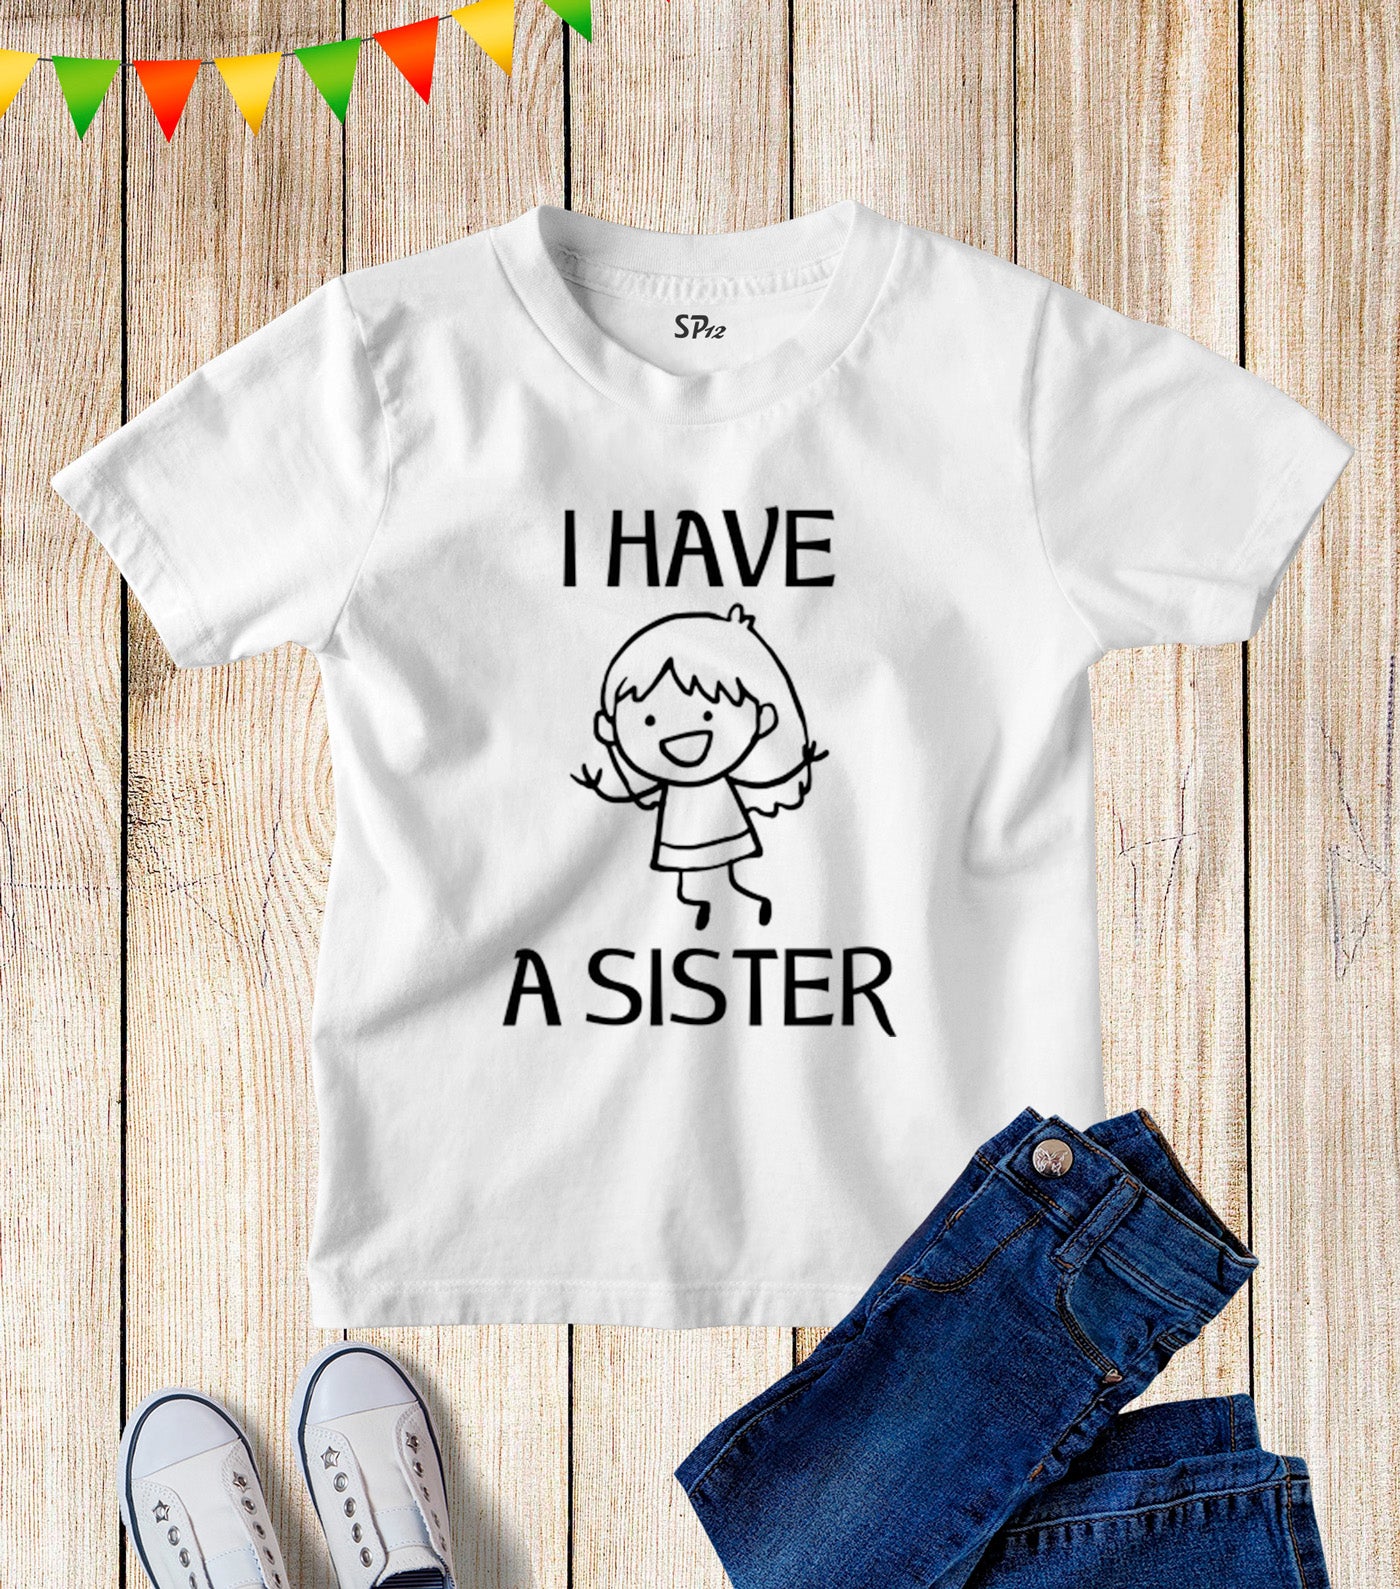 I Have a Sister Kids T Shirt